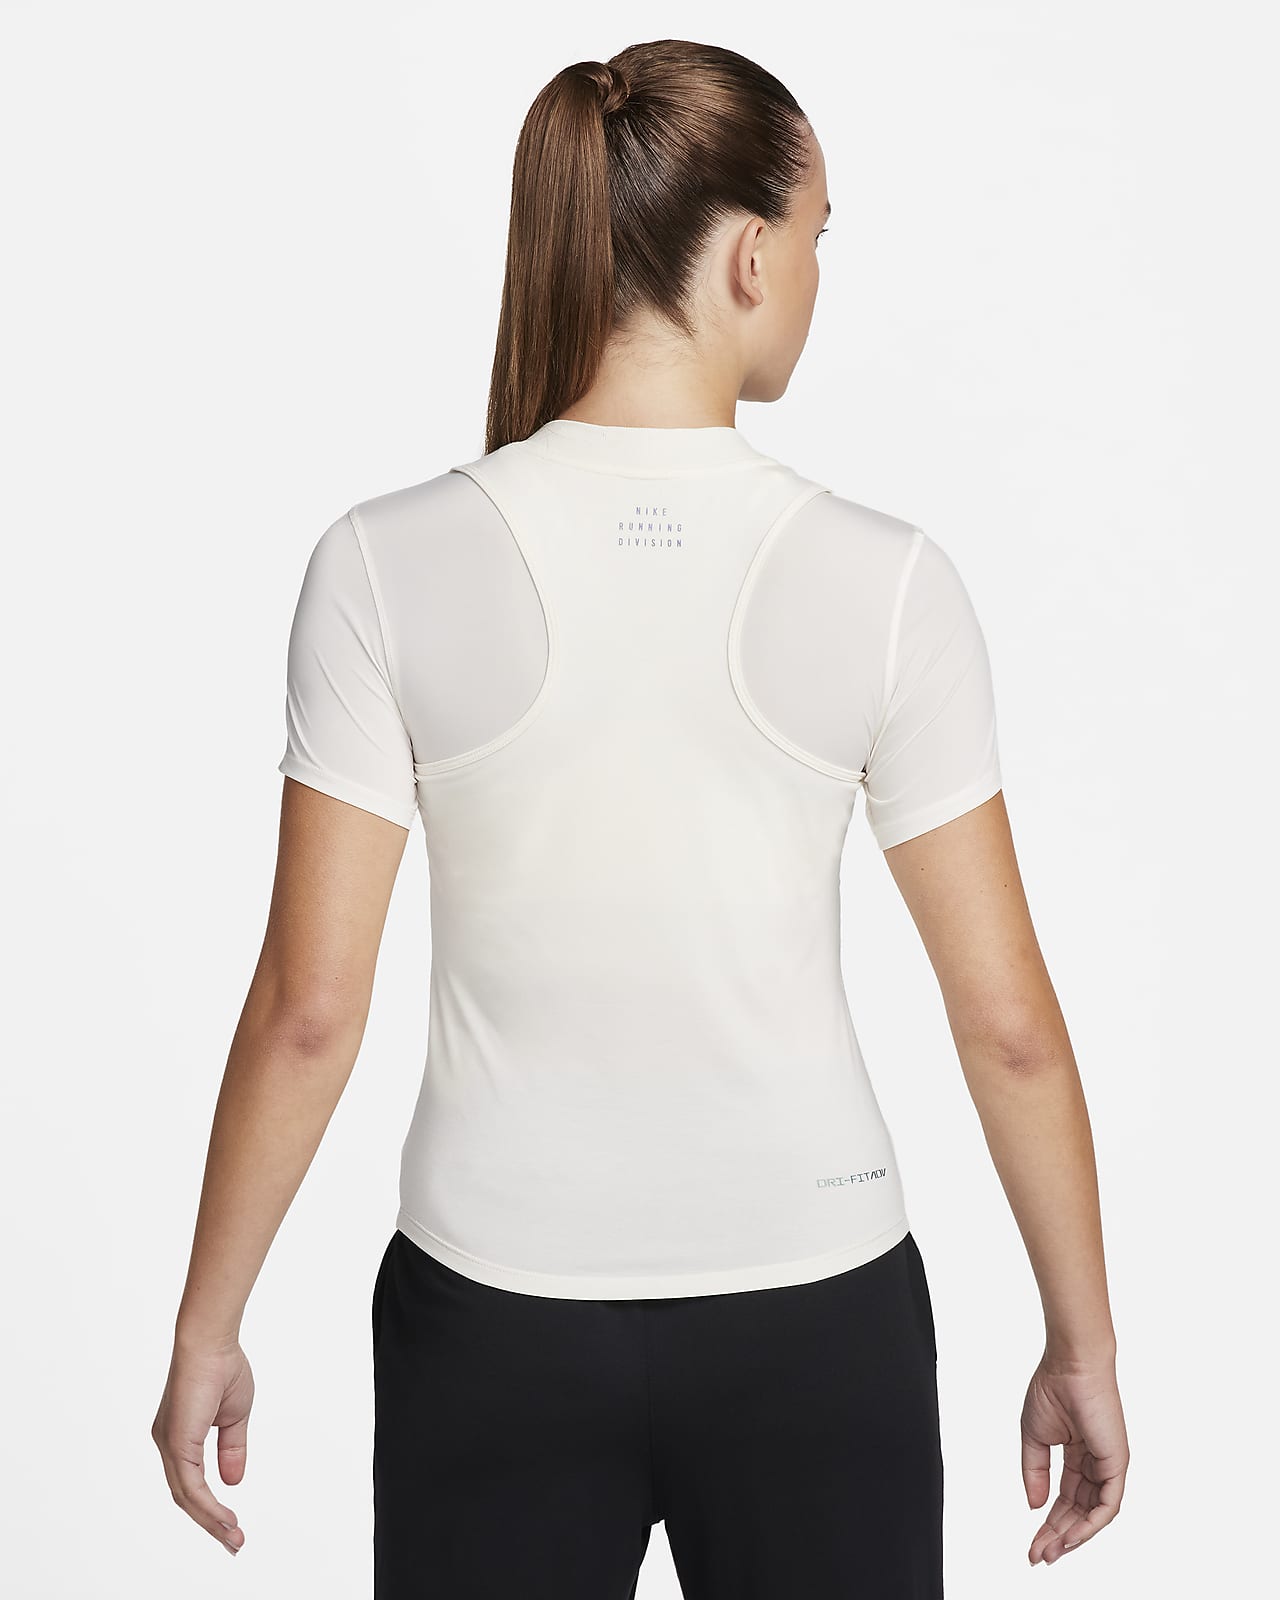 The Best Nike Women's Long-sleeve Workout Tops to Shop Now. Nike IL